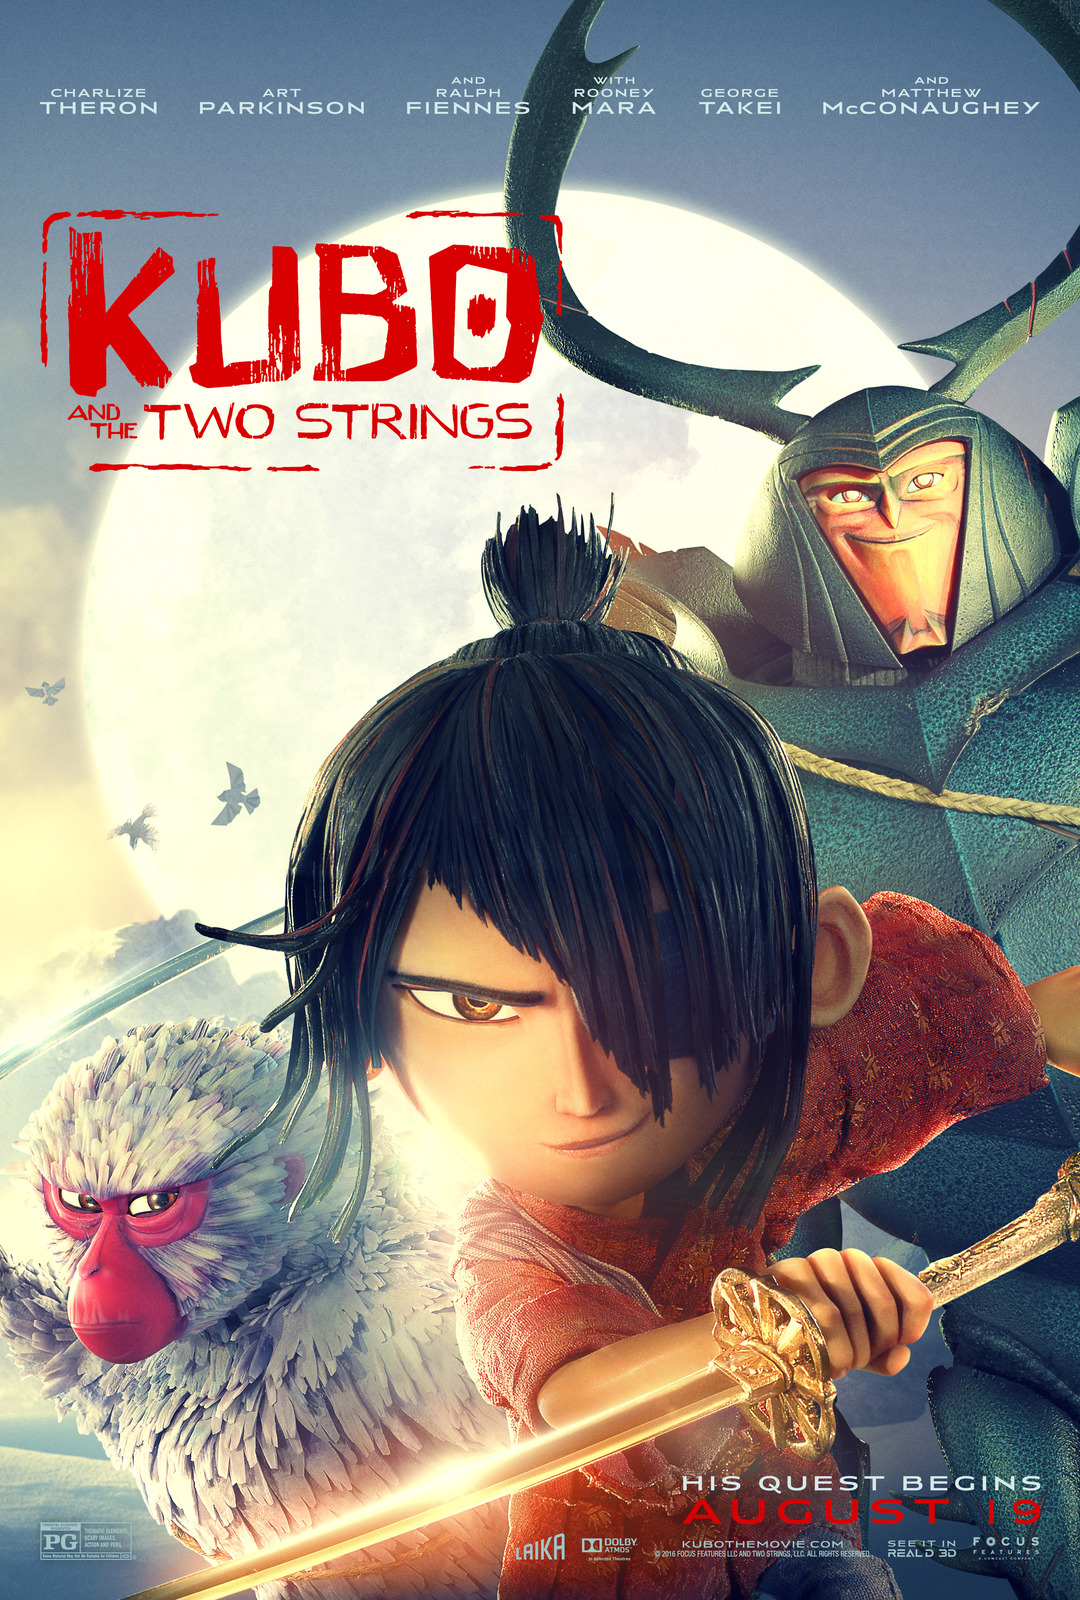 Badla (2019 film) and Kubo and the Two Strings